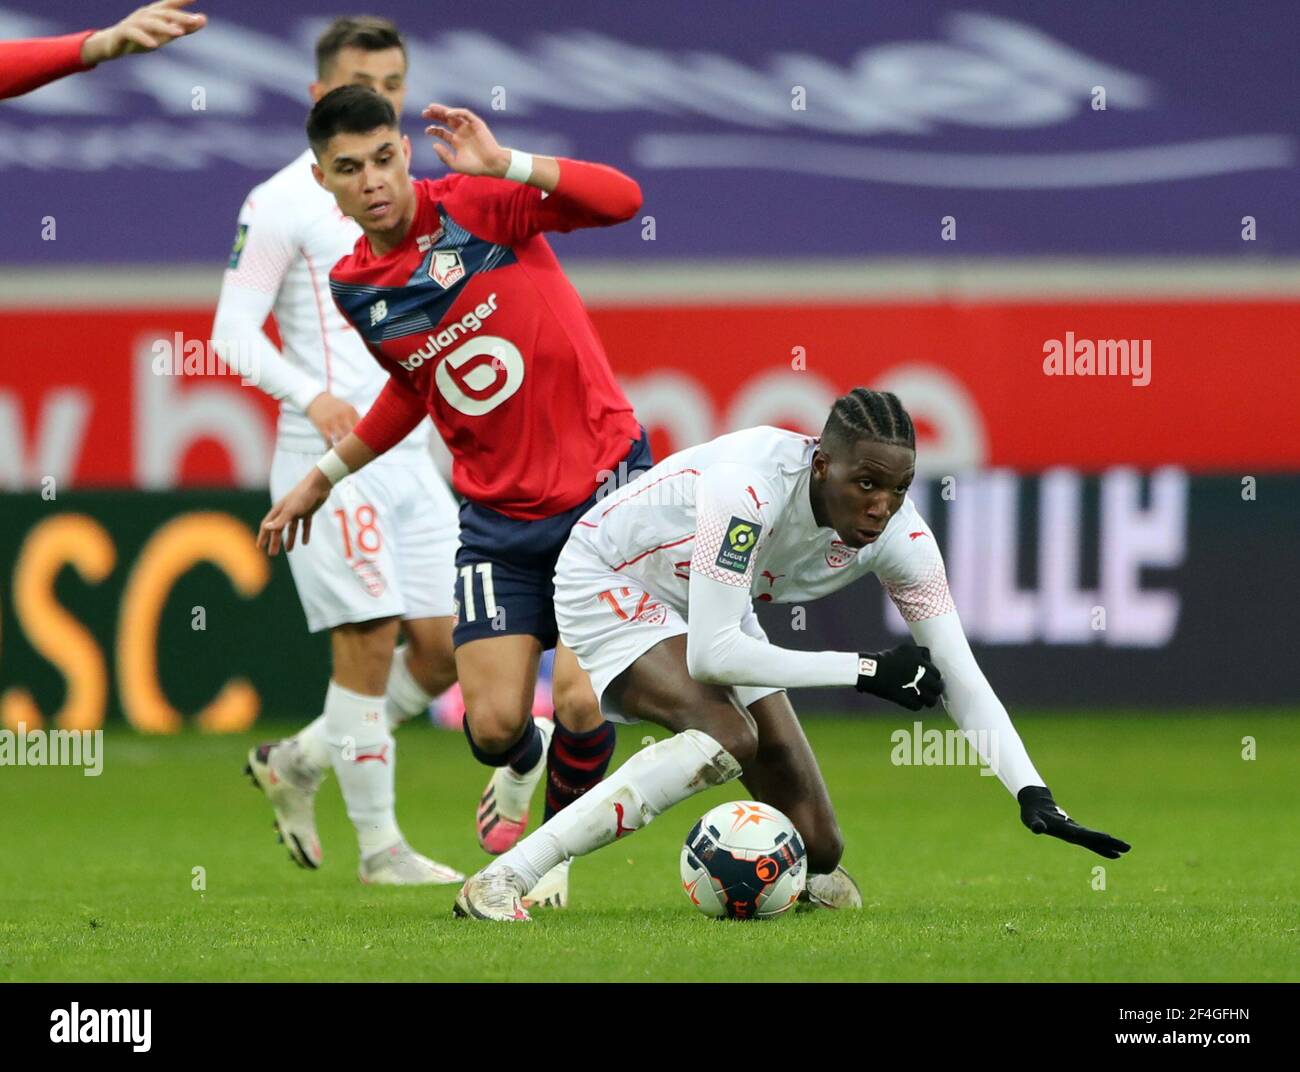 Soccer Football - Ligue 1 - Lille v Nimes Olympique - Stade Pierre-Mauroy,  Lille, France - March 21, 2021 Lille's Luiz Araujo in action with Nimes  Olympique's Lamine Fomba REUTERS/Pascal Rossignol Stock Photo - Alamy